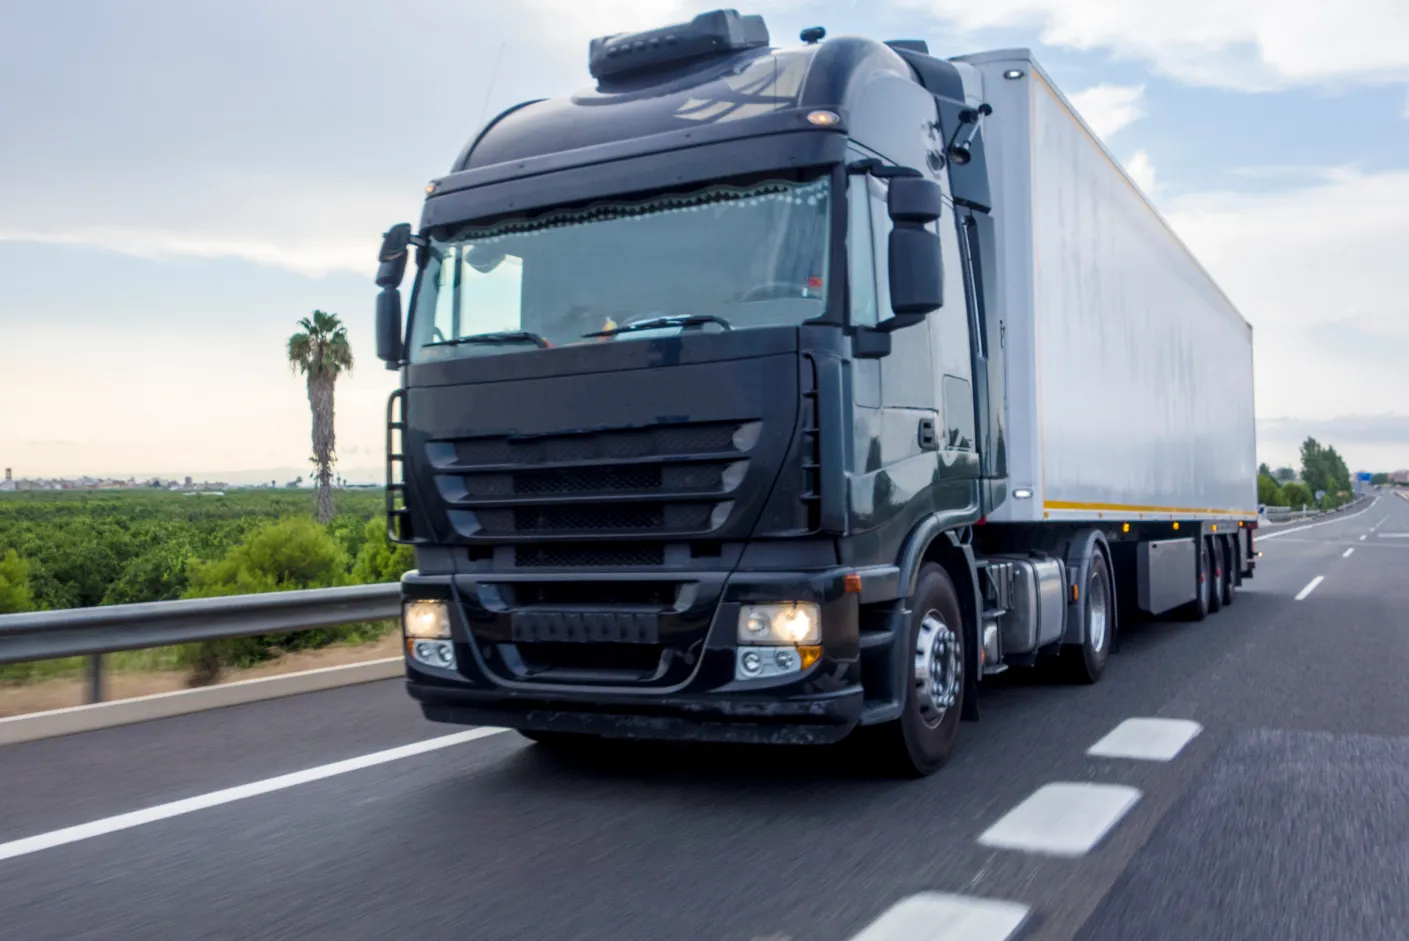 Get to know about the CDL permit practice test in details